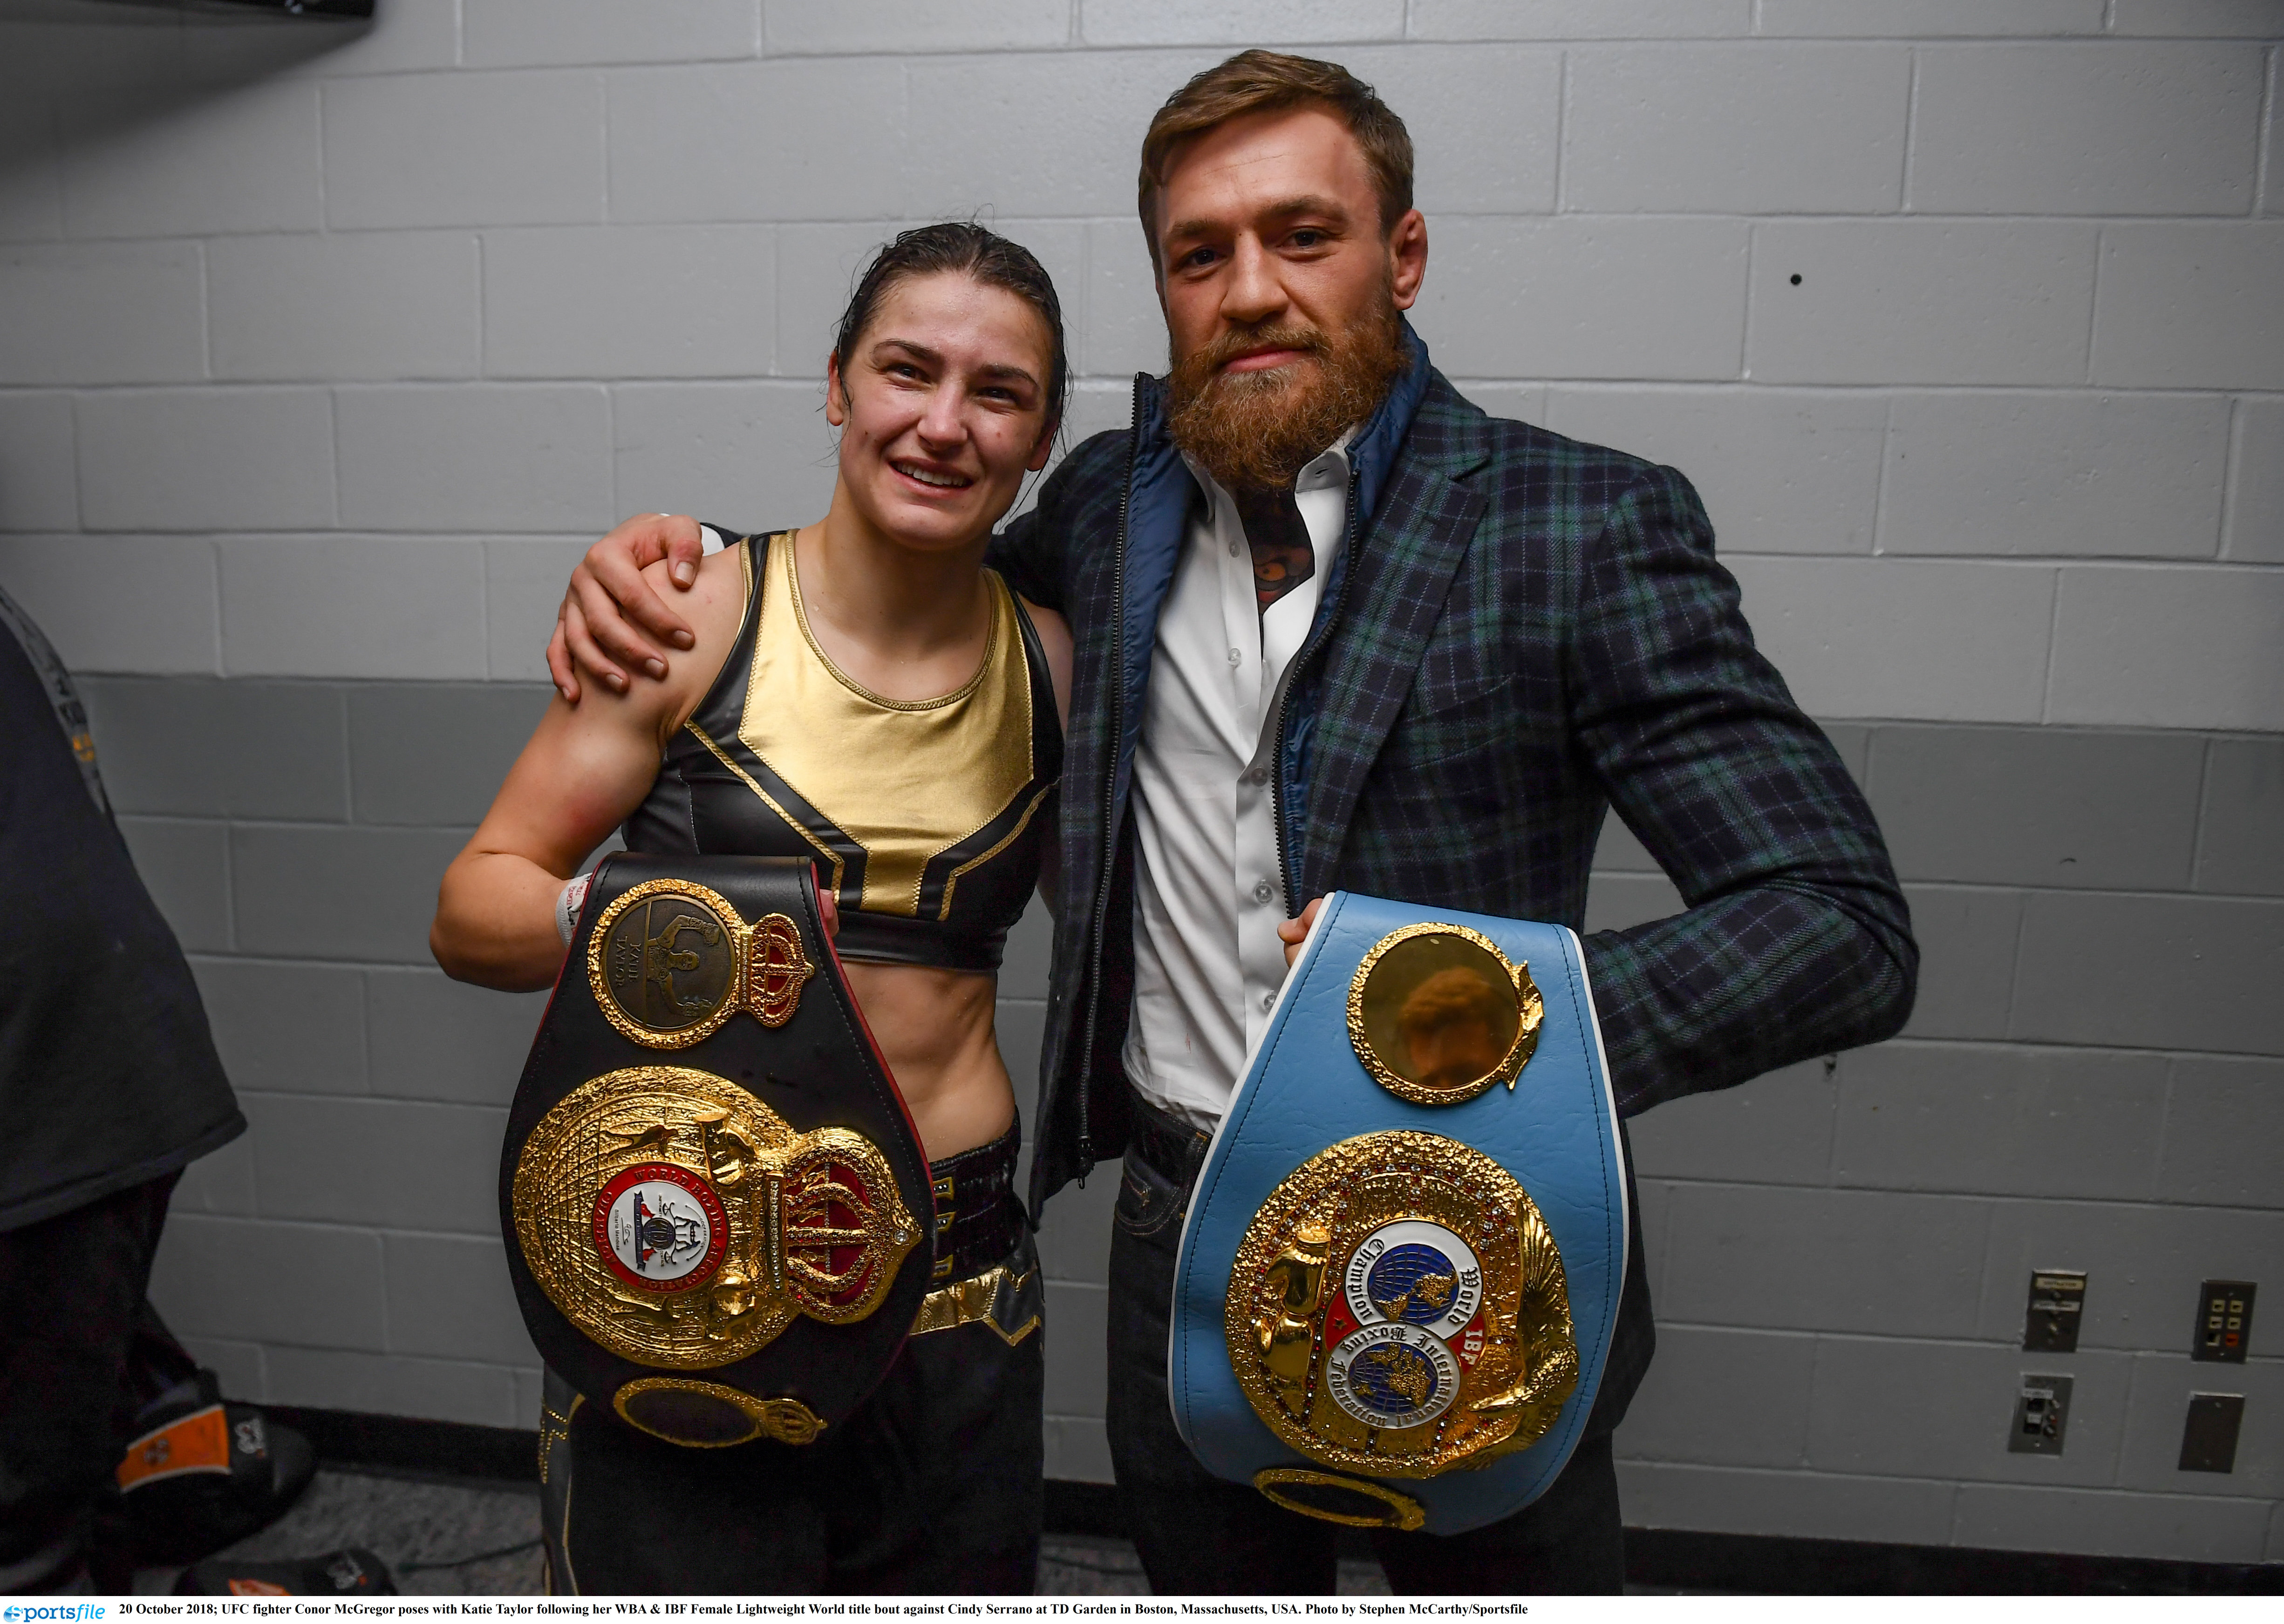 Conor McGregor visits Irish boxing champ Katie Taylor backstage - has glowing words of praise and support -